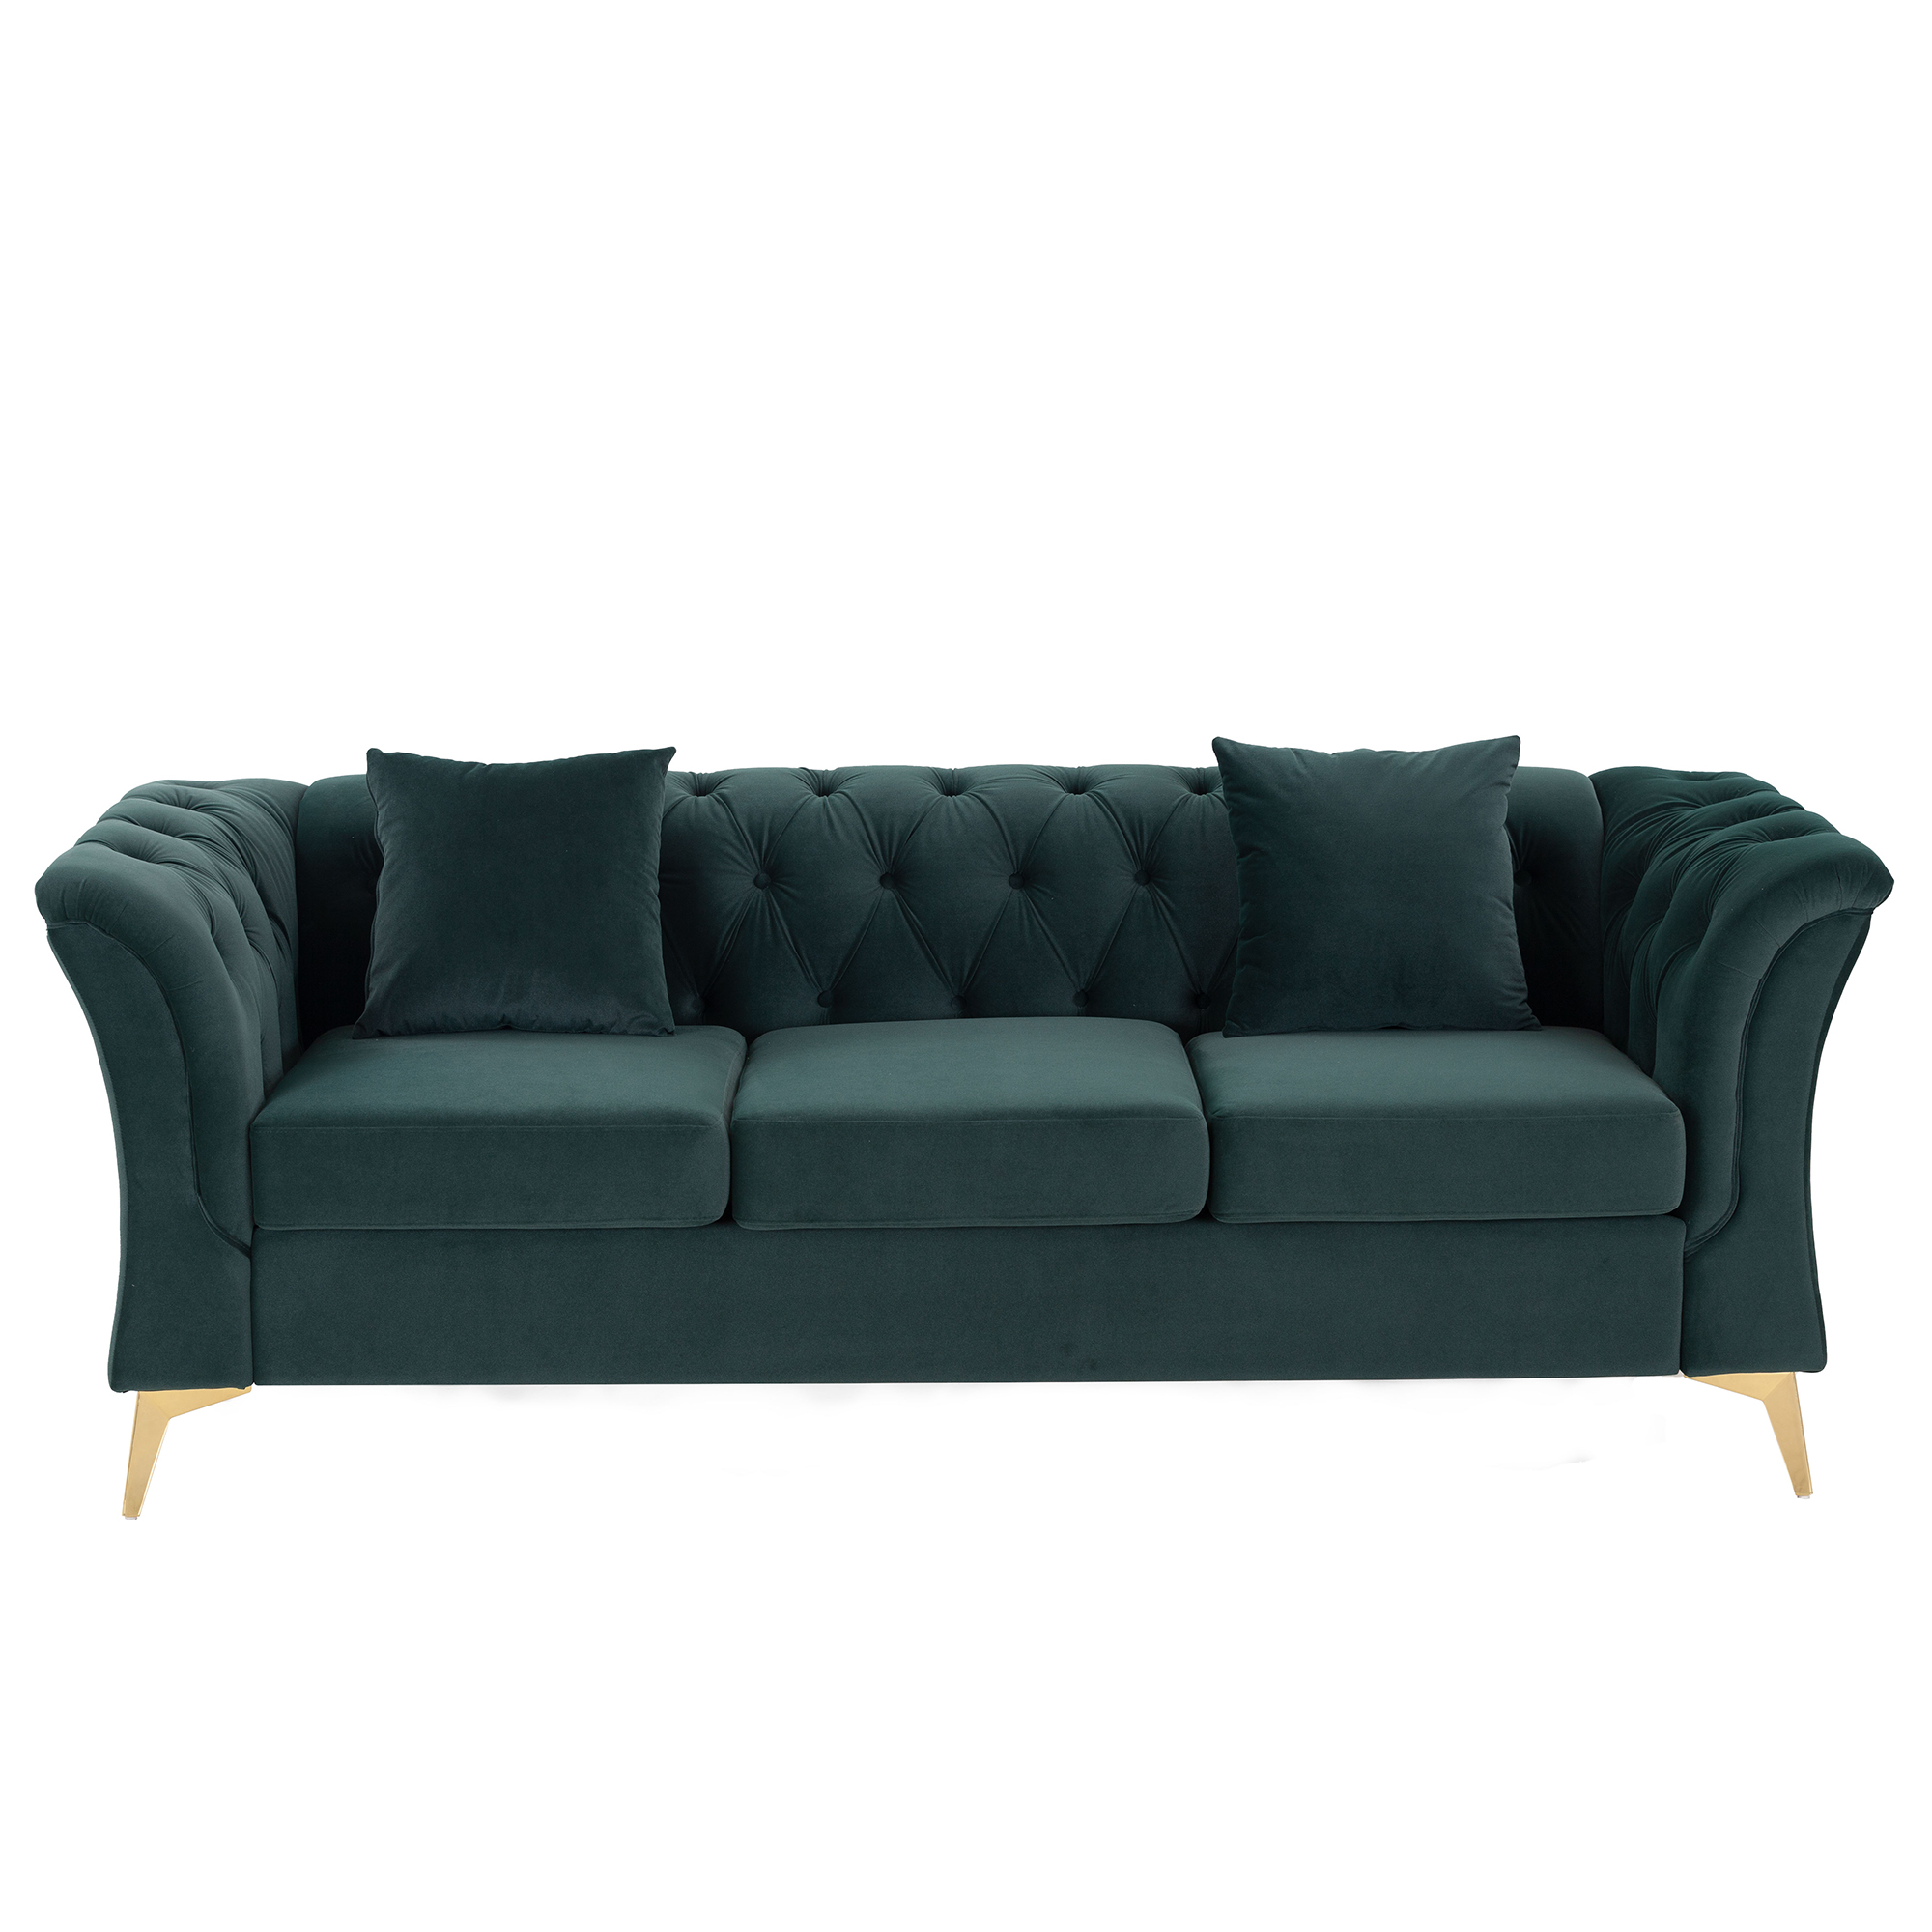 Modern Chesterfield Curved Sofa Tufted Velvet Couch 3 Seat Button Tufed Loveseat with Scroll Arms and Gold Metal Legs for Living Room Bedroom Green